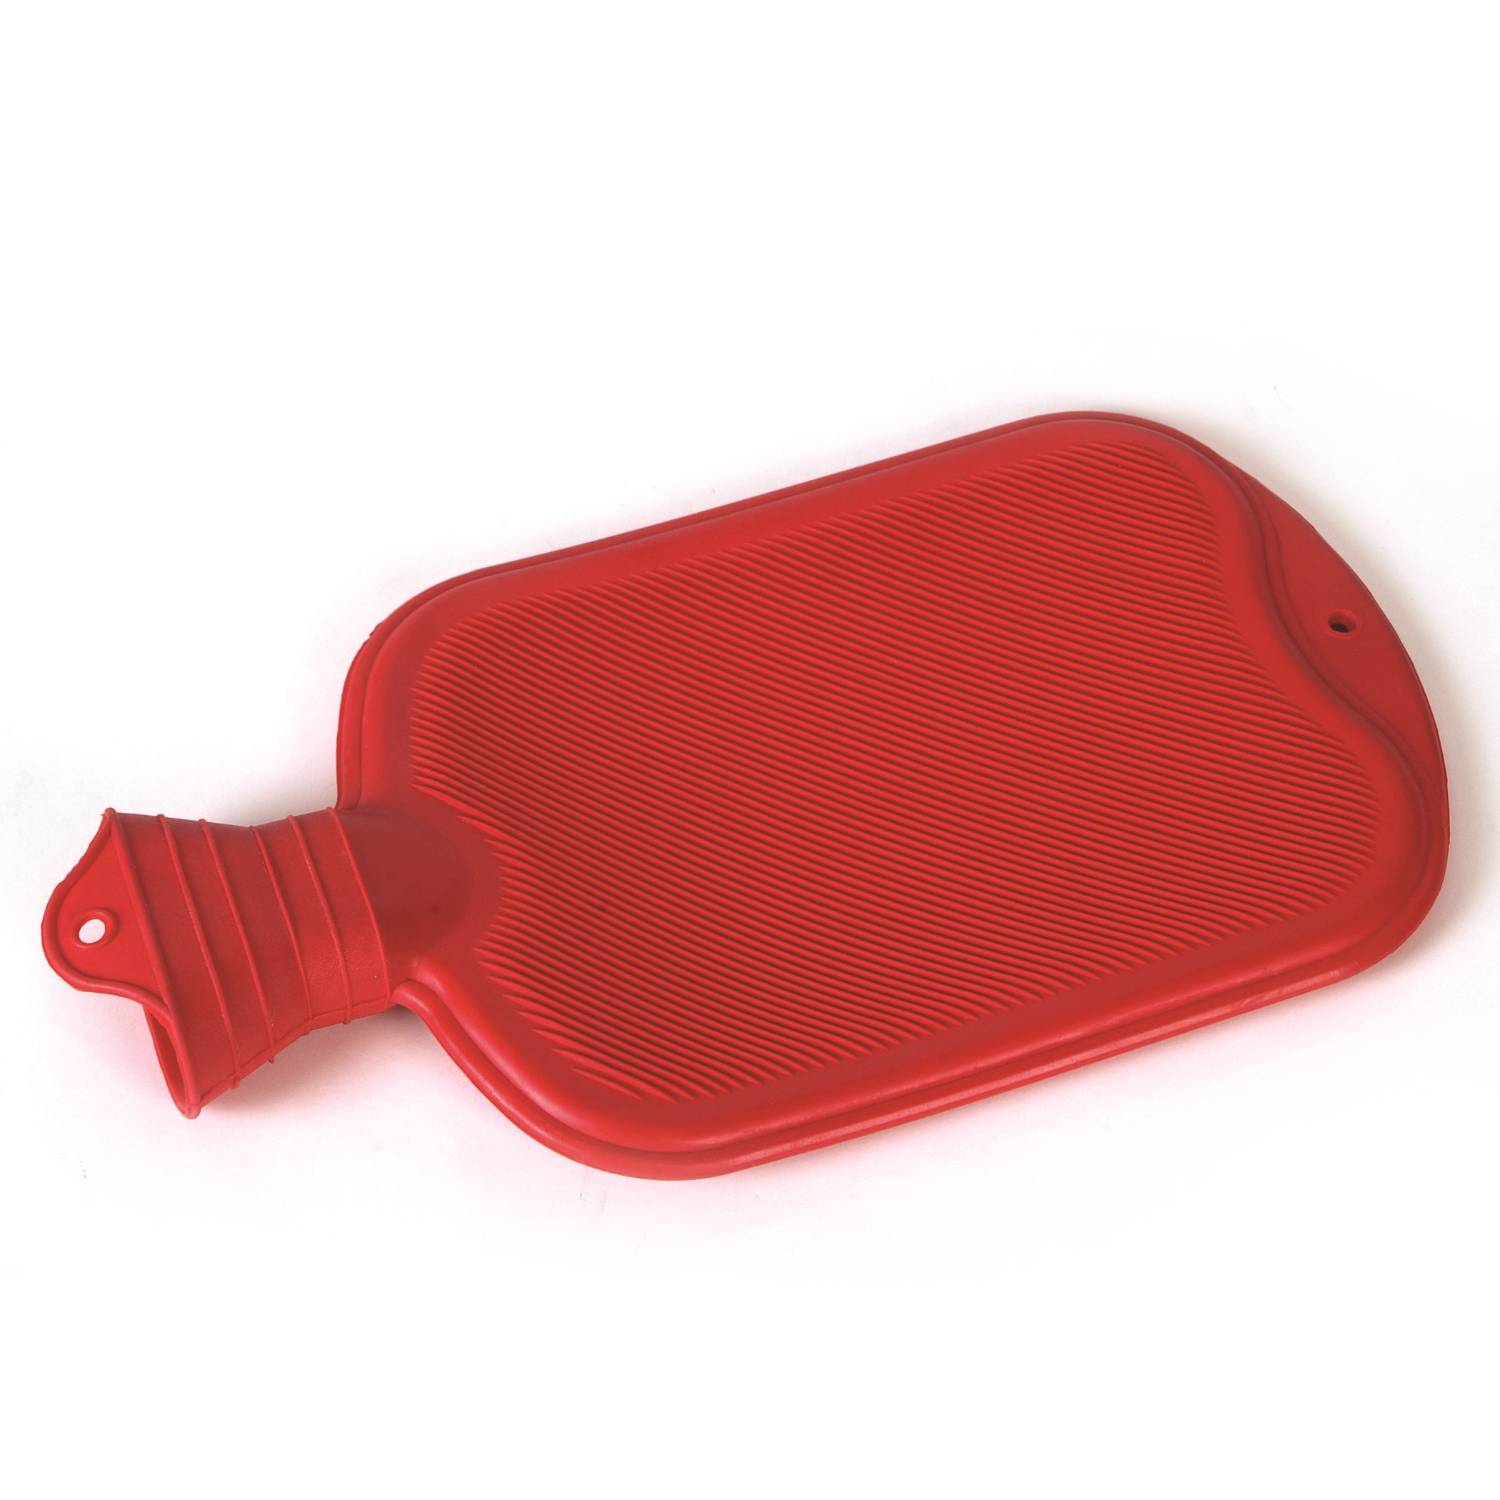 HomeTop Premium Classic Rubber Hot Water Bottle (Red)